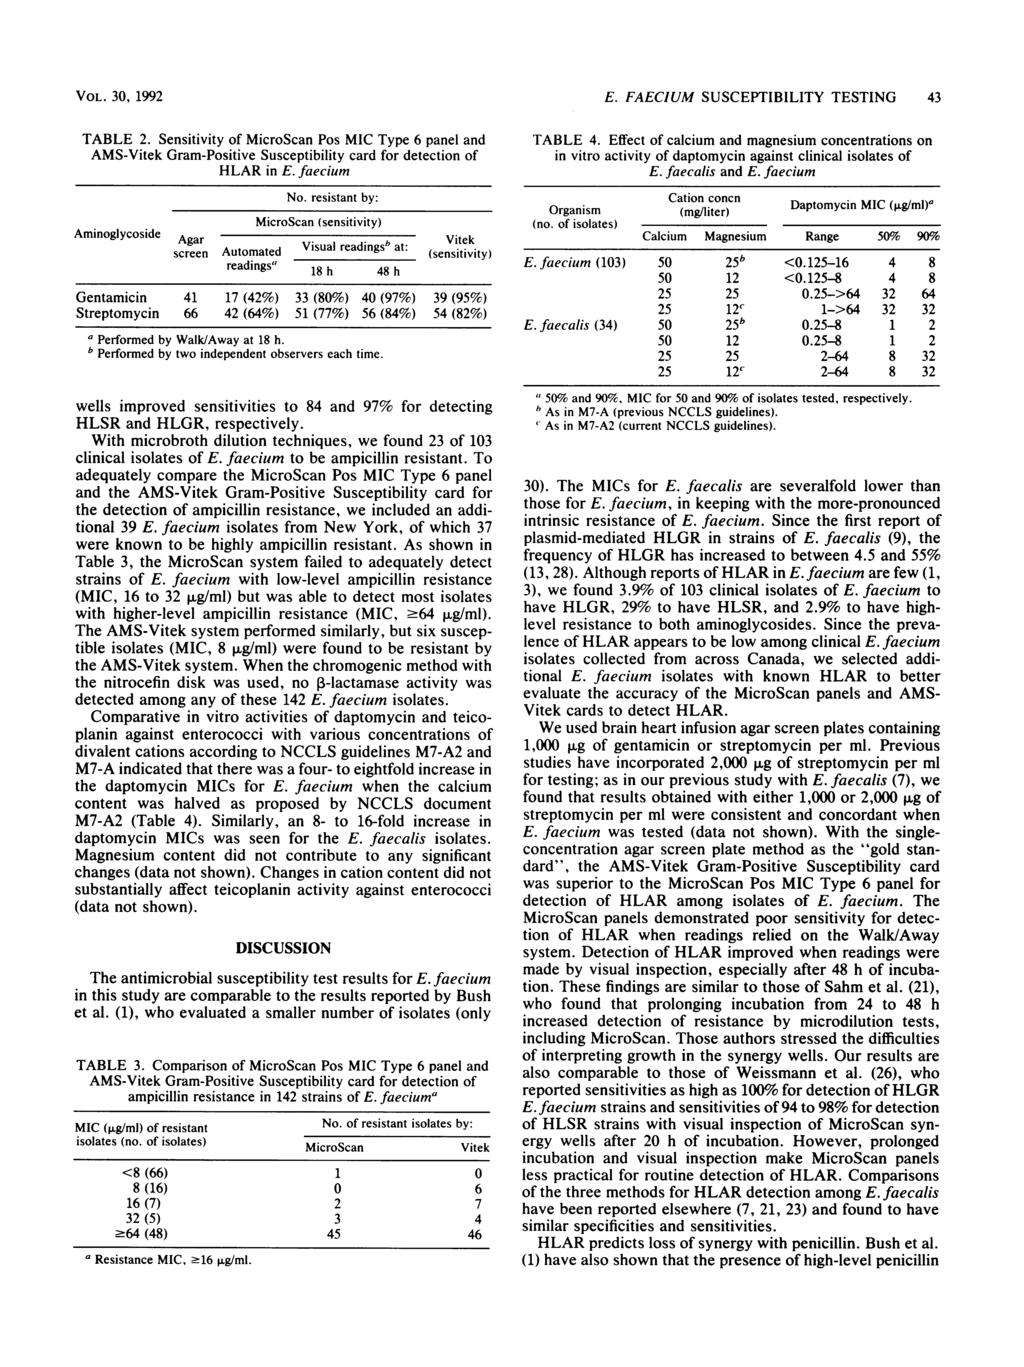 VOL. 30, 1992 TABLE 2. Sensitivity of MicroScan Pos MIC Type 6 panel and AMS-Vitek Gram-Positive Susceptibility card for detection of HLAR in E. faecium No.